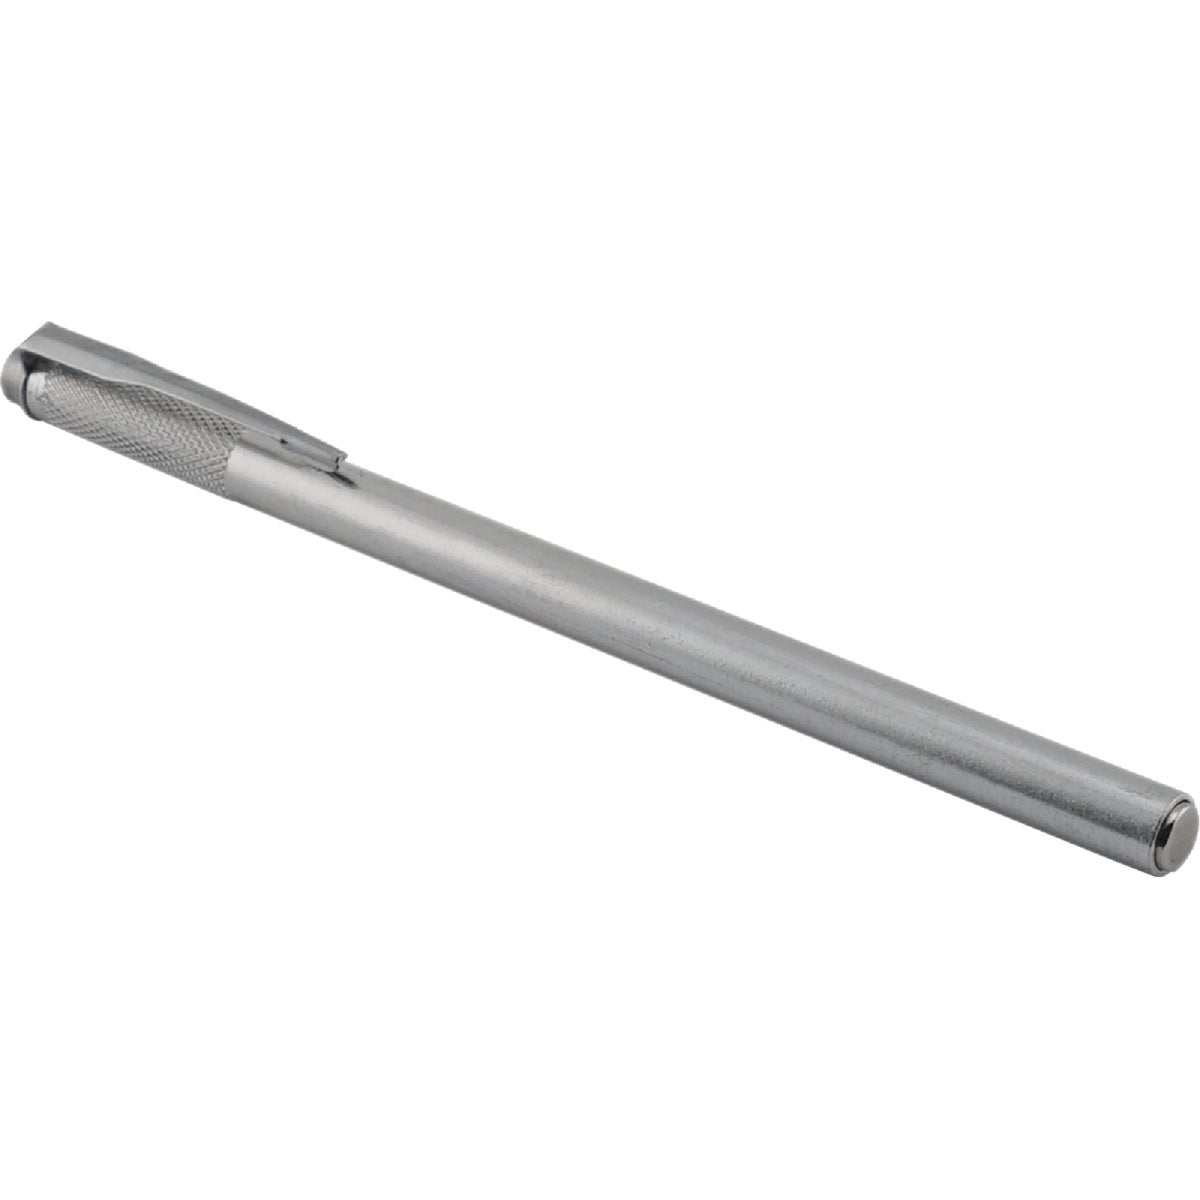 Item 321556, Powerful permanent Alnico magnet in an aluminum holder with pocket clip.